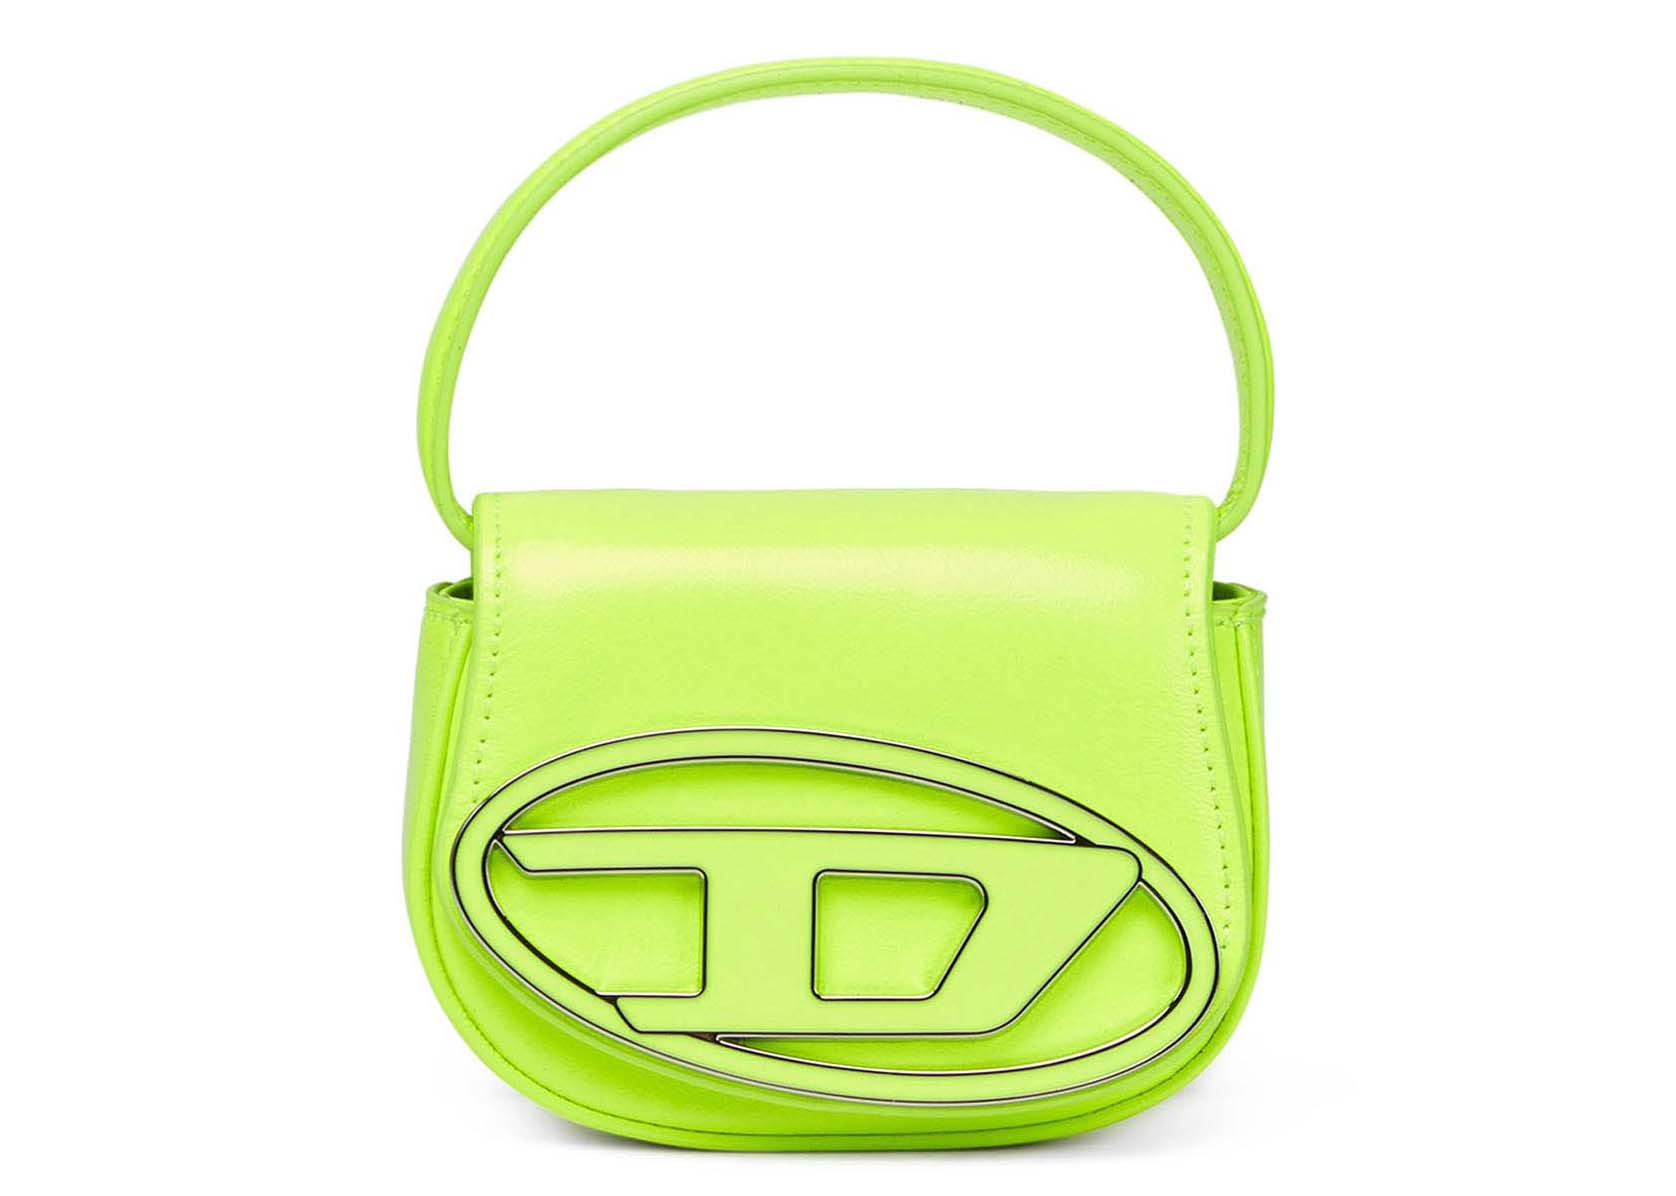 Diesel 1DR XS Mini Bag Yellow Fluo in Cow Leather with Silver 